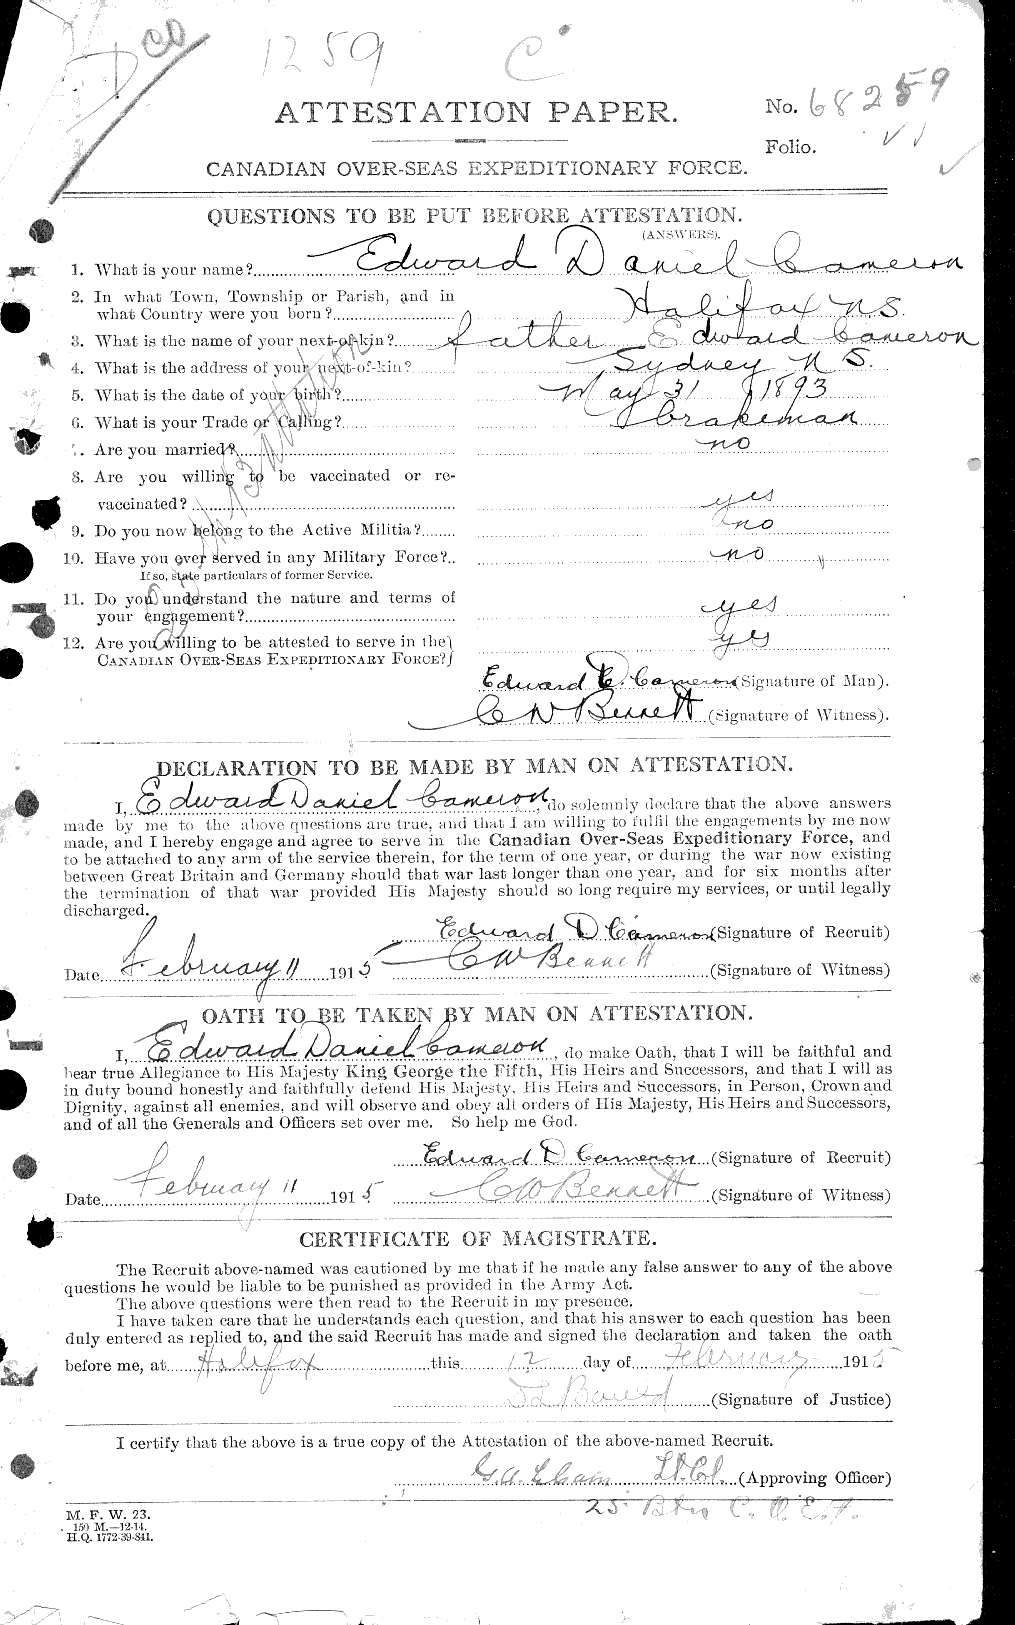 Personnel Records of the First World War - CEF 006524a